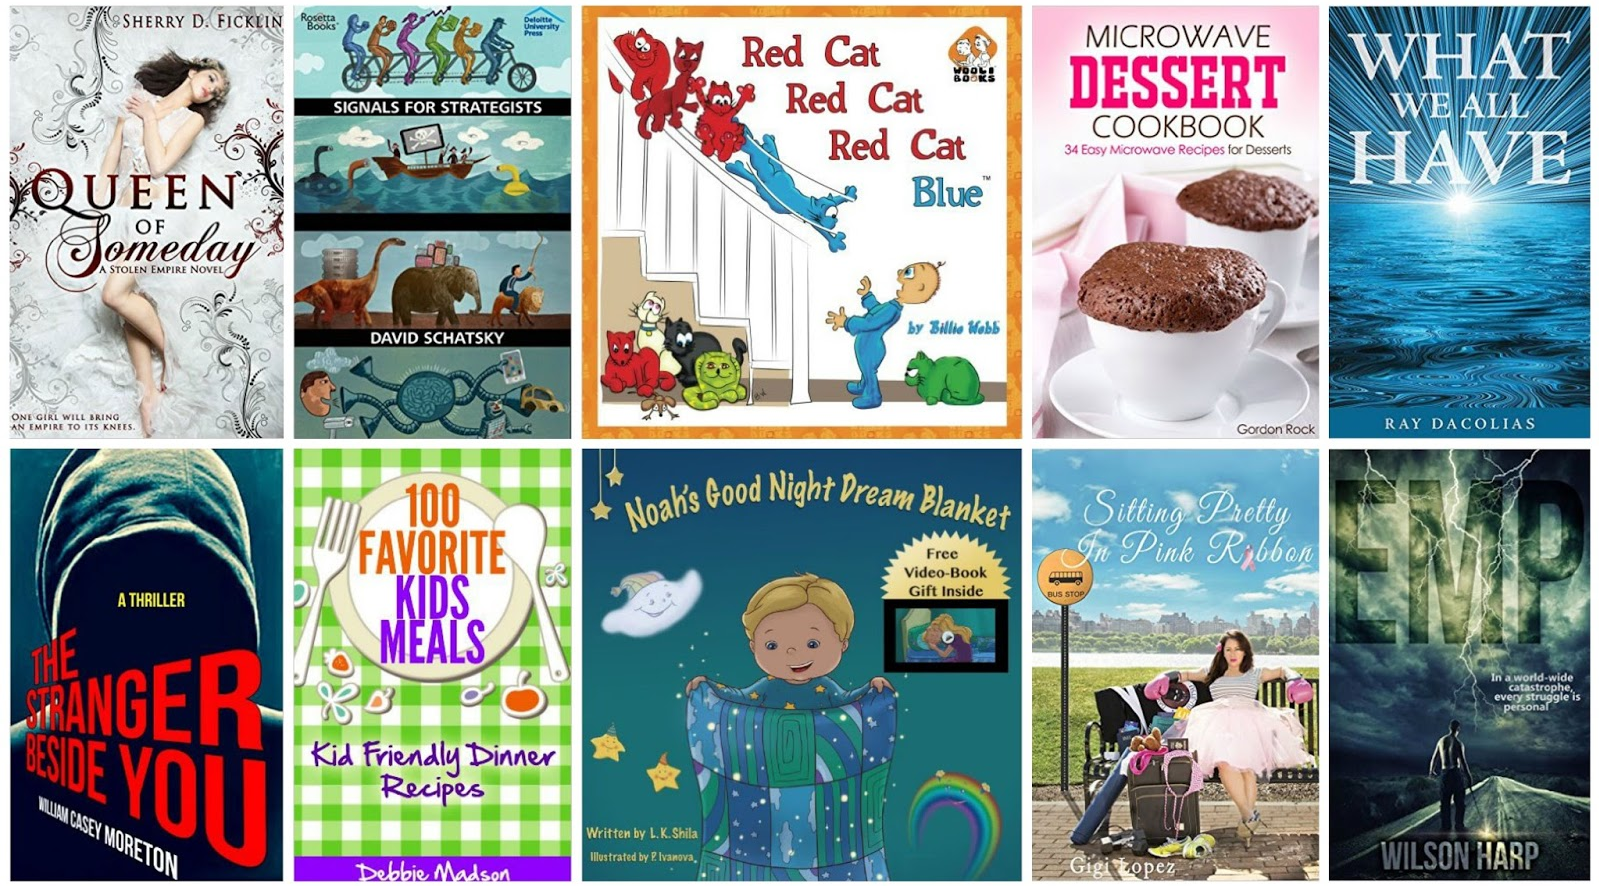 Free ebooks: 100 Favorite Kids Meals, What We All Have + More Books